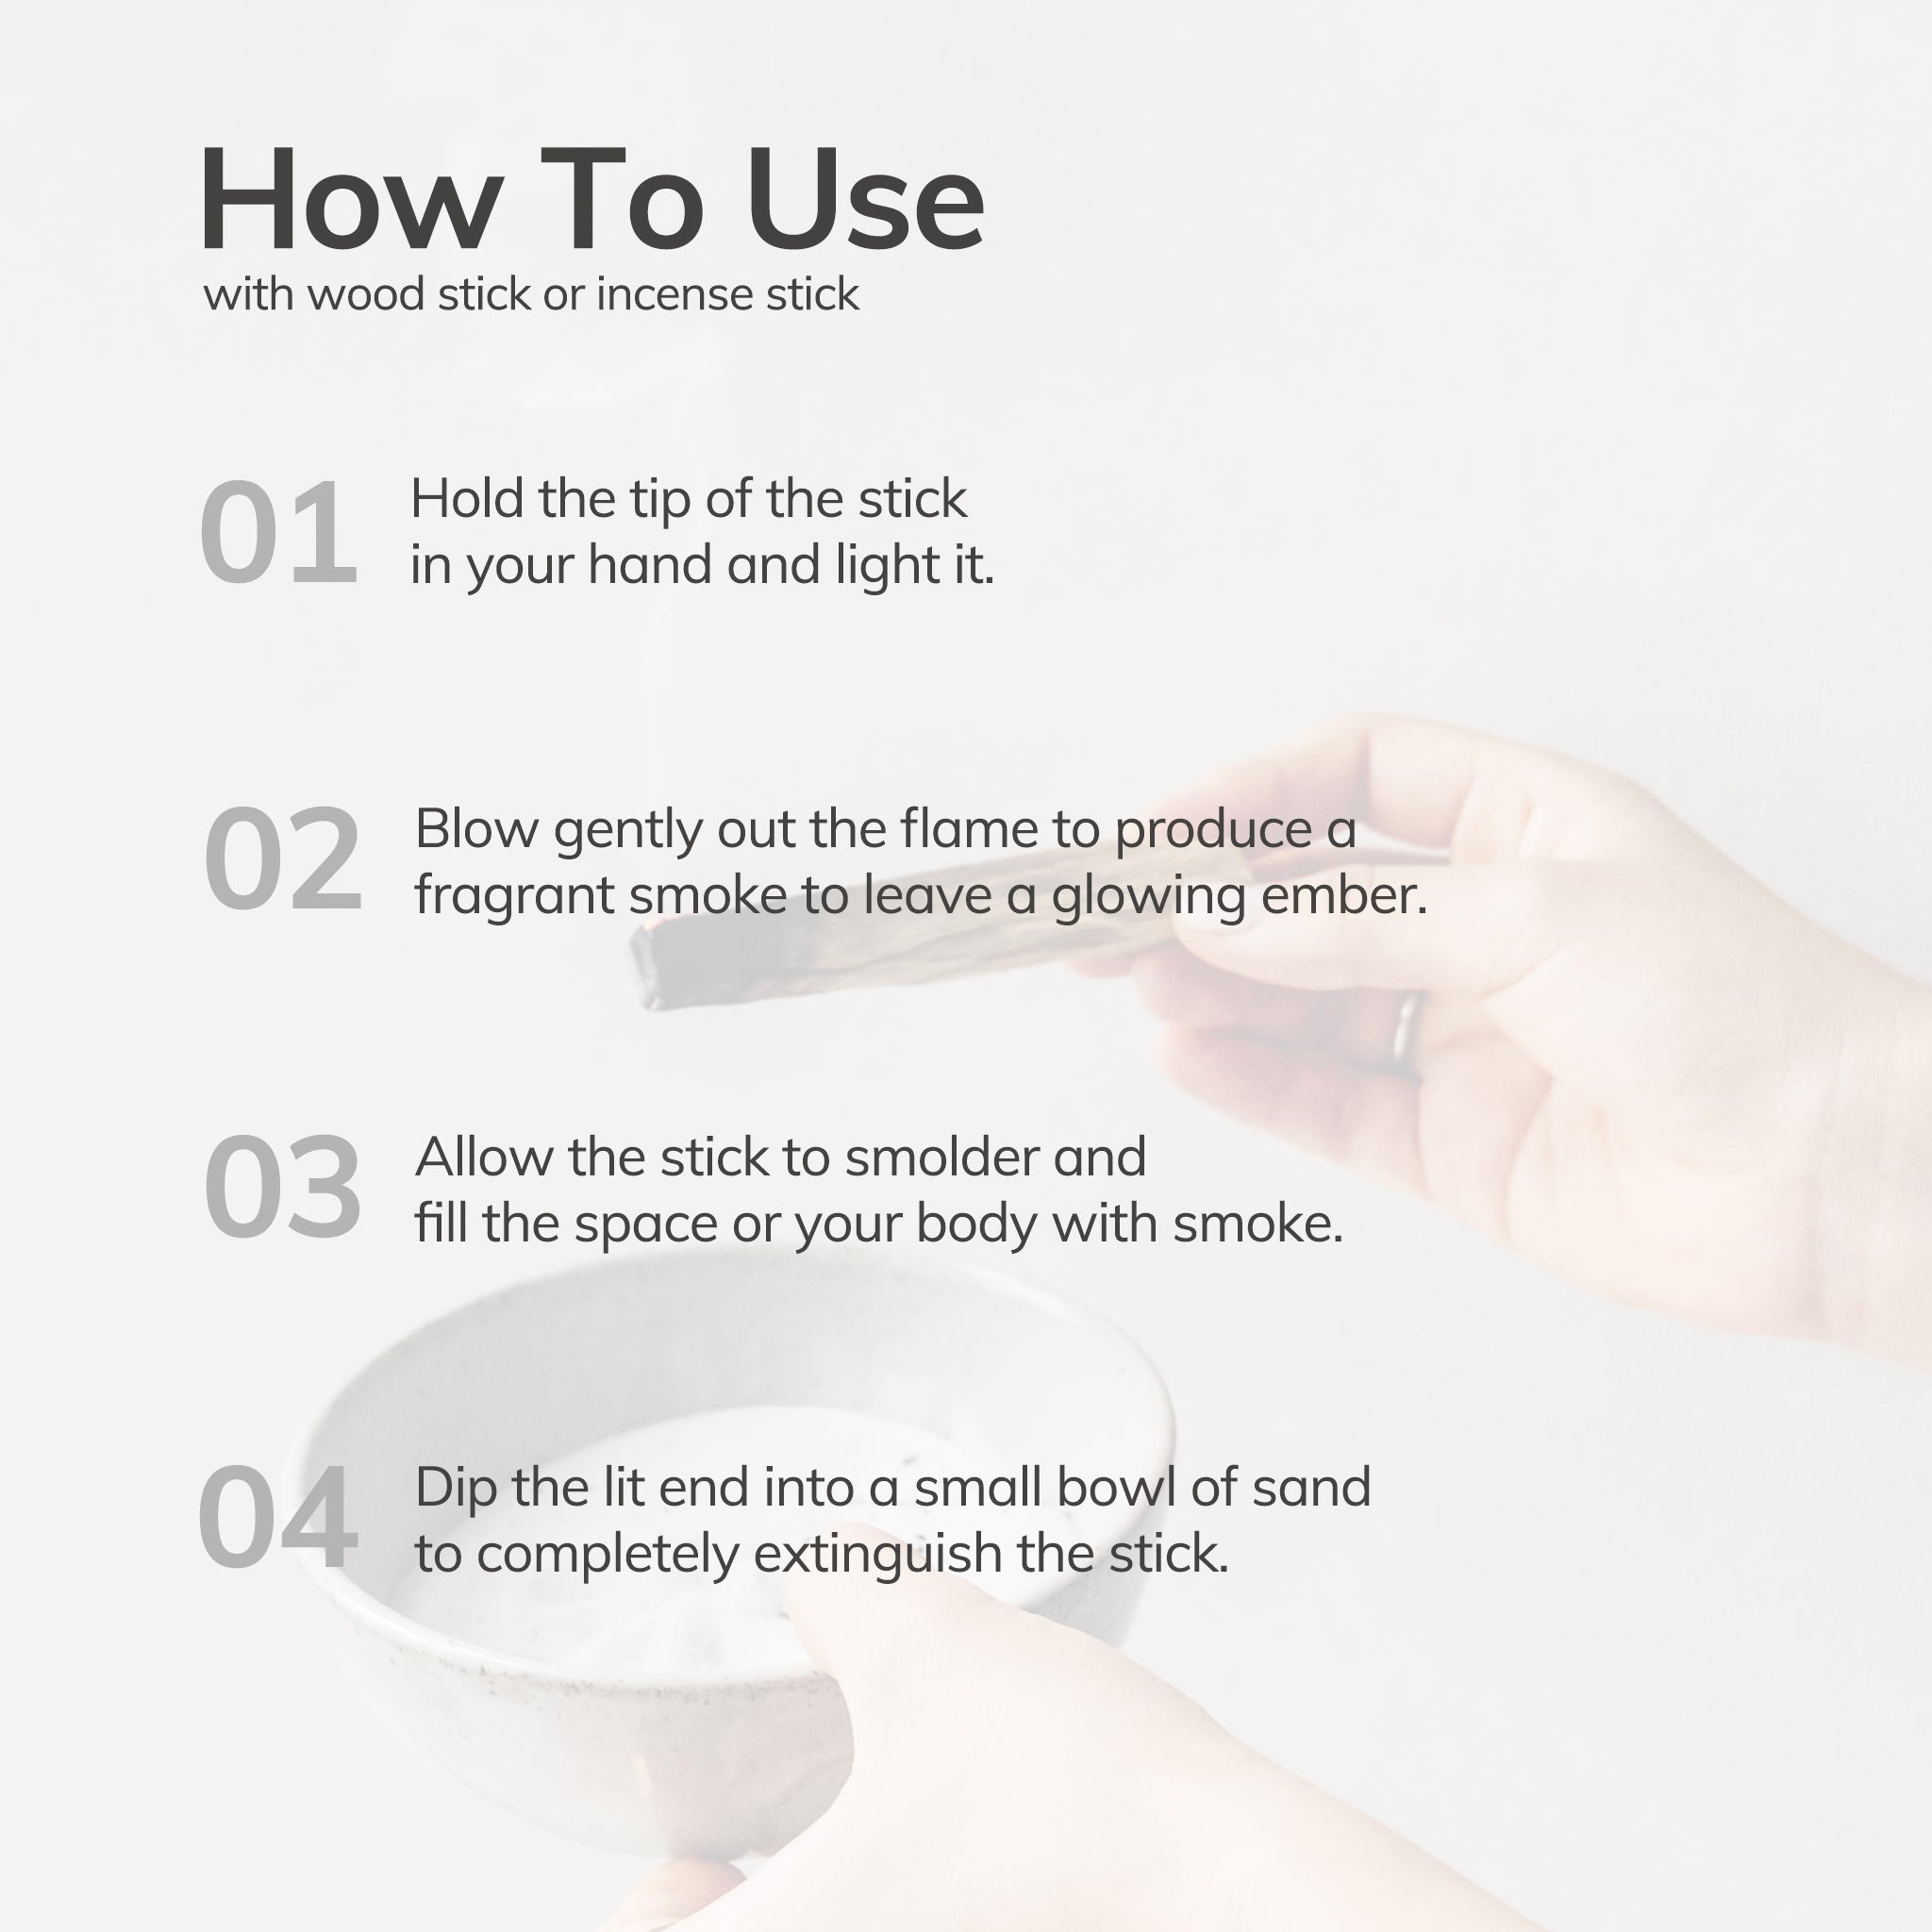 Chronological list of how to use with mini white sage incense stick.